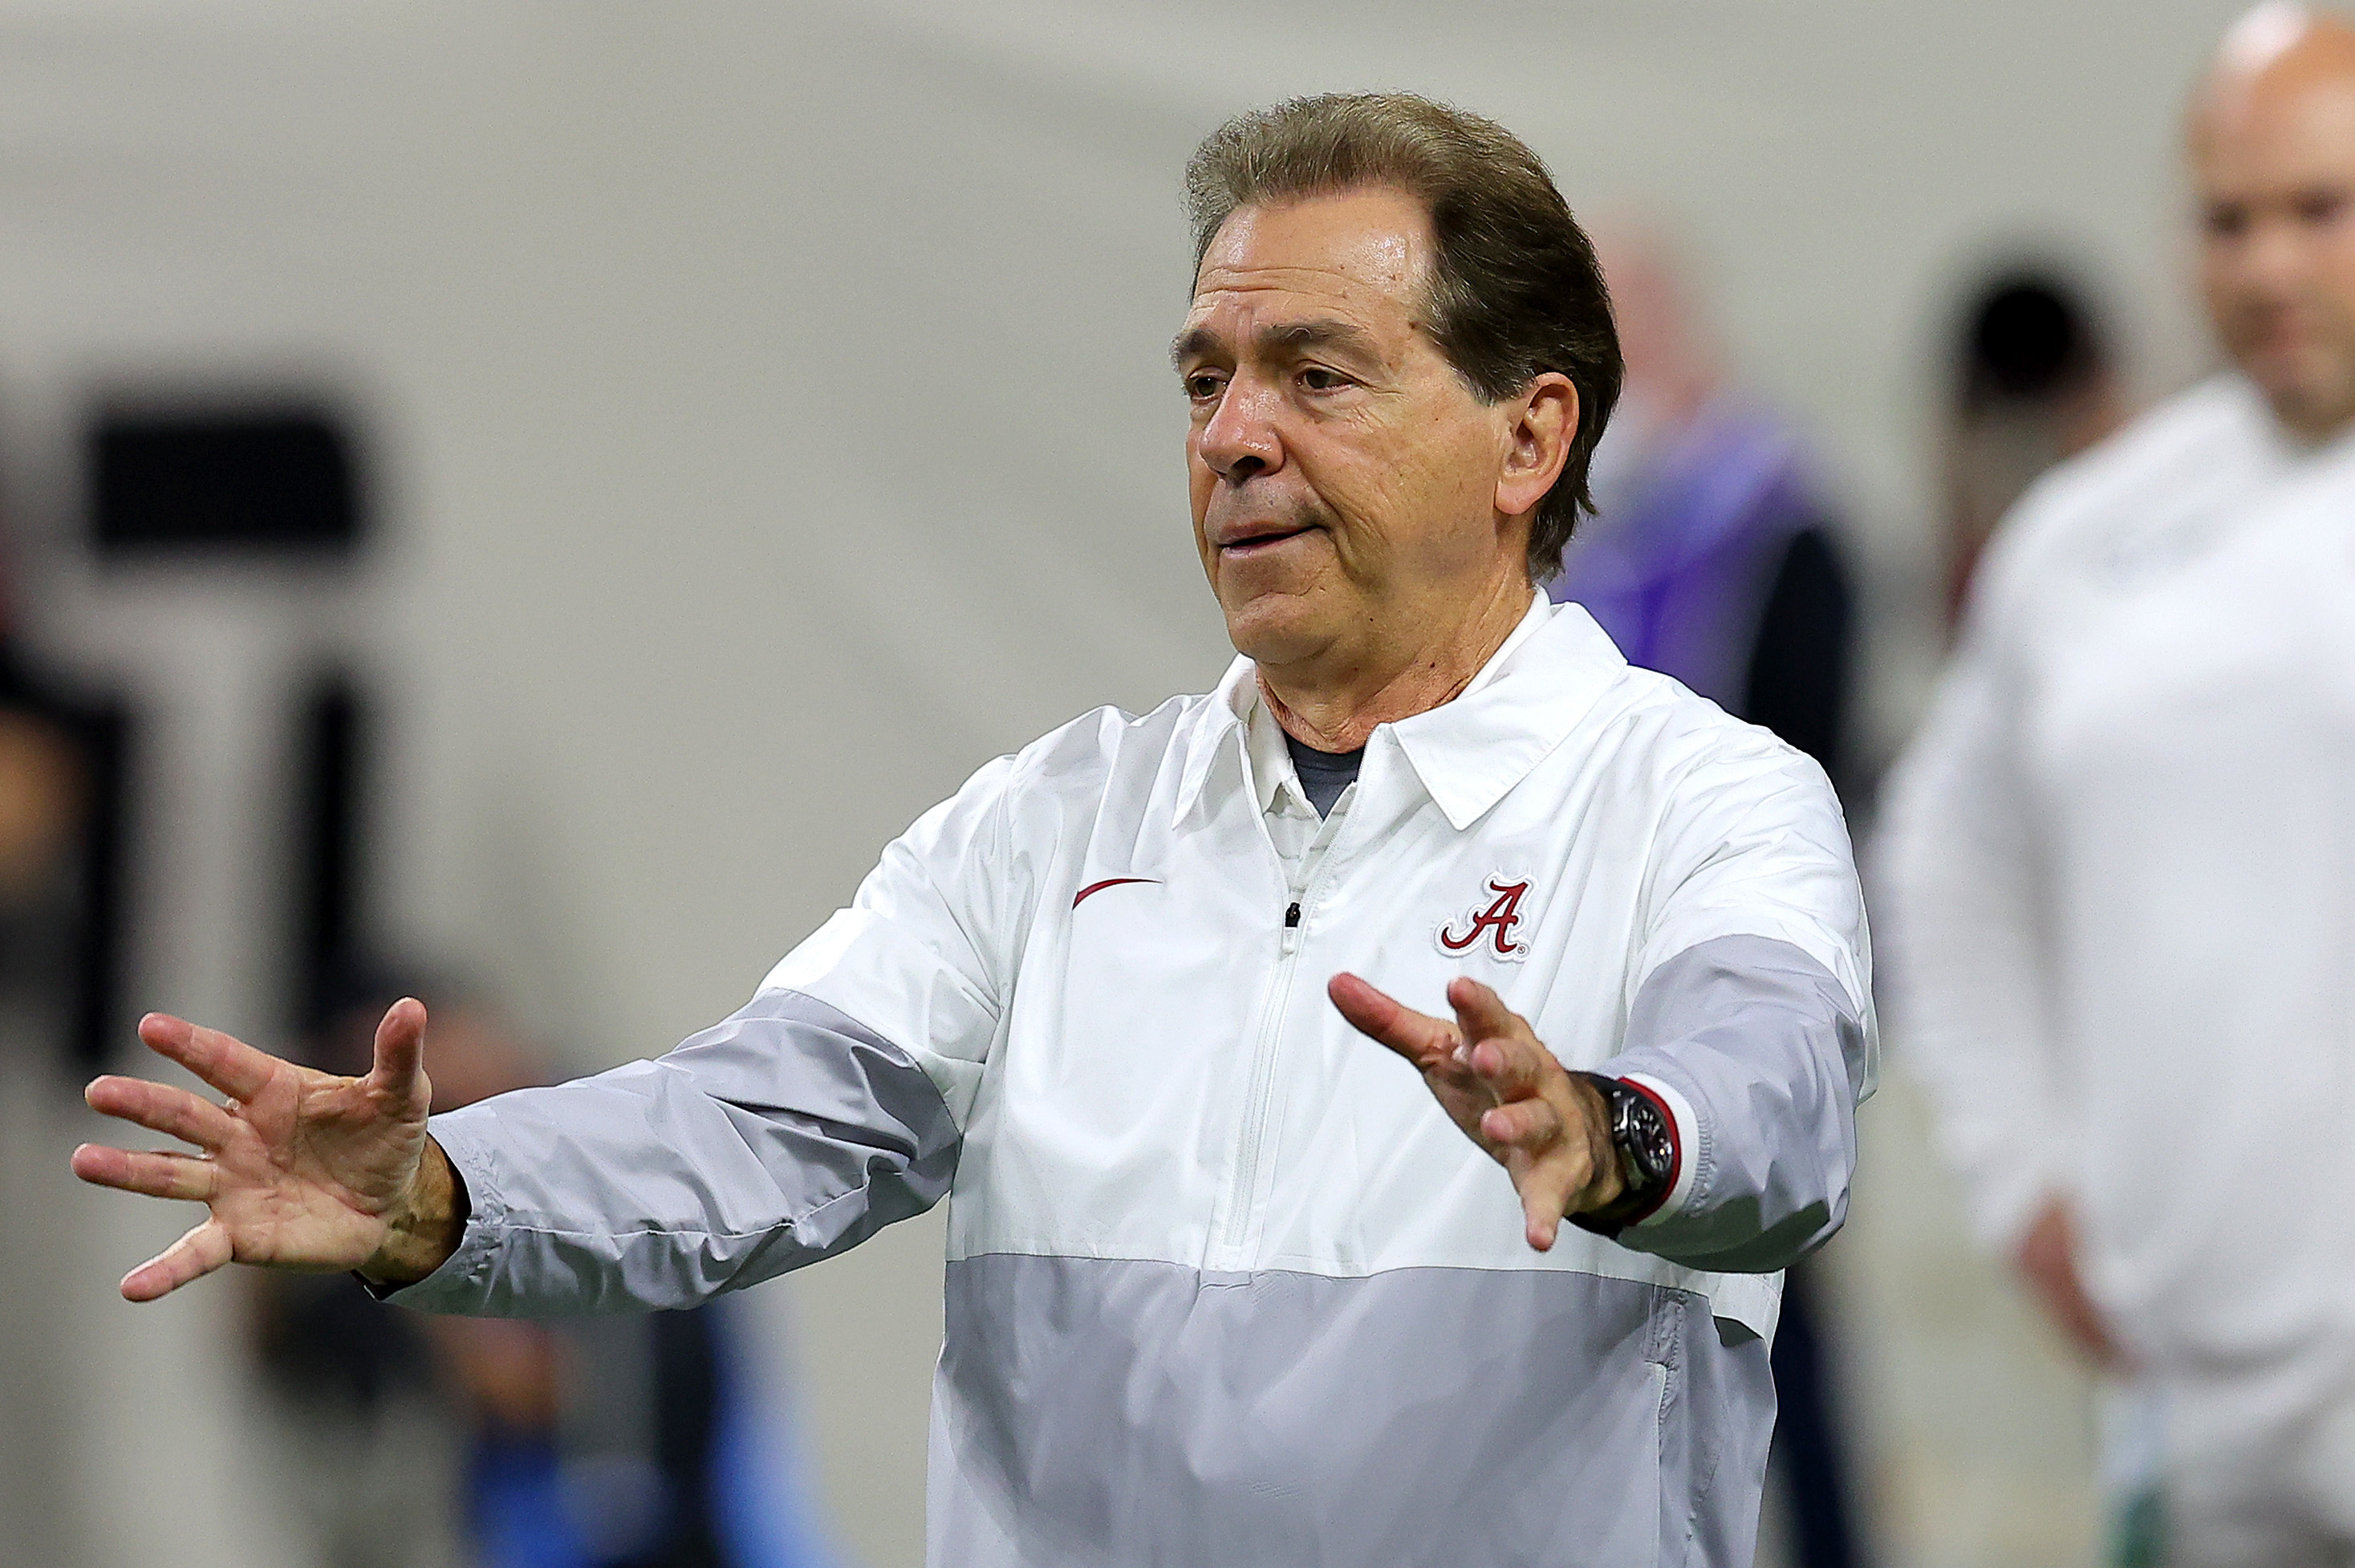 Alabama's Nick Saban Says Using NIL Deals to Recruit Is 'Where I Draw The Line' thumbnail